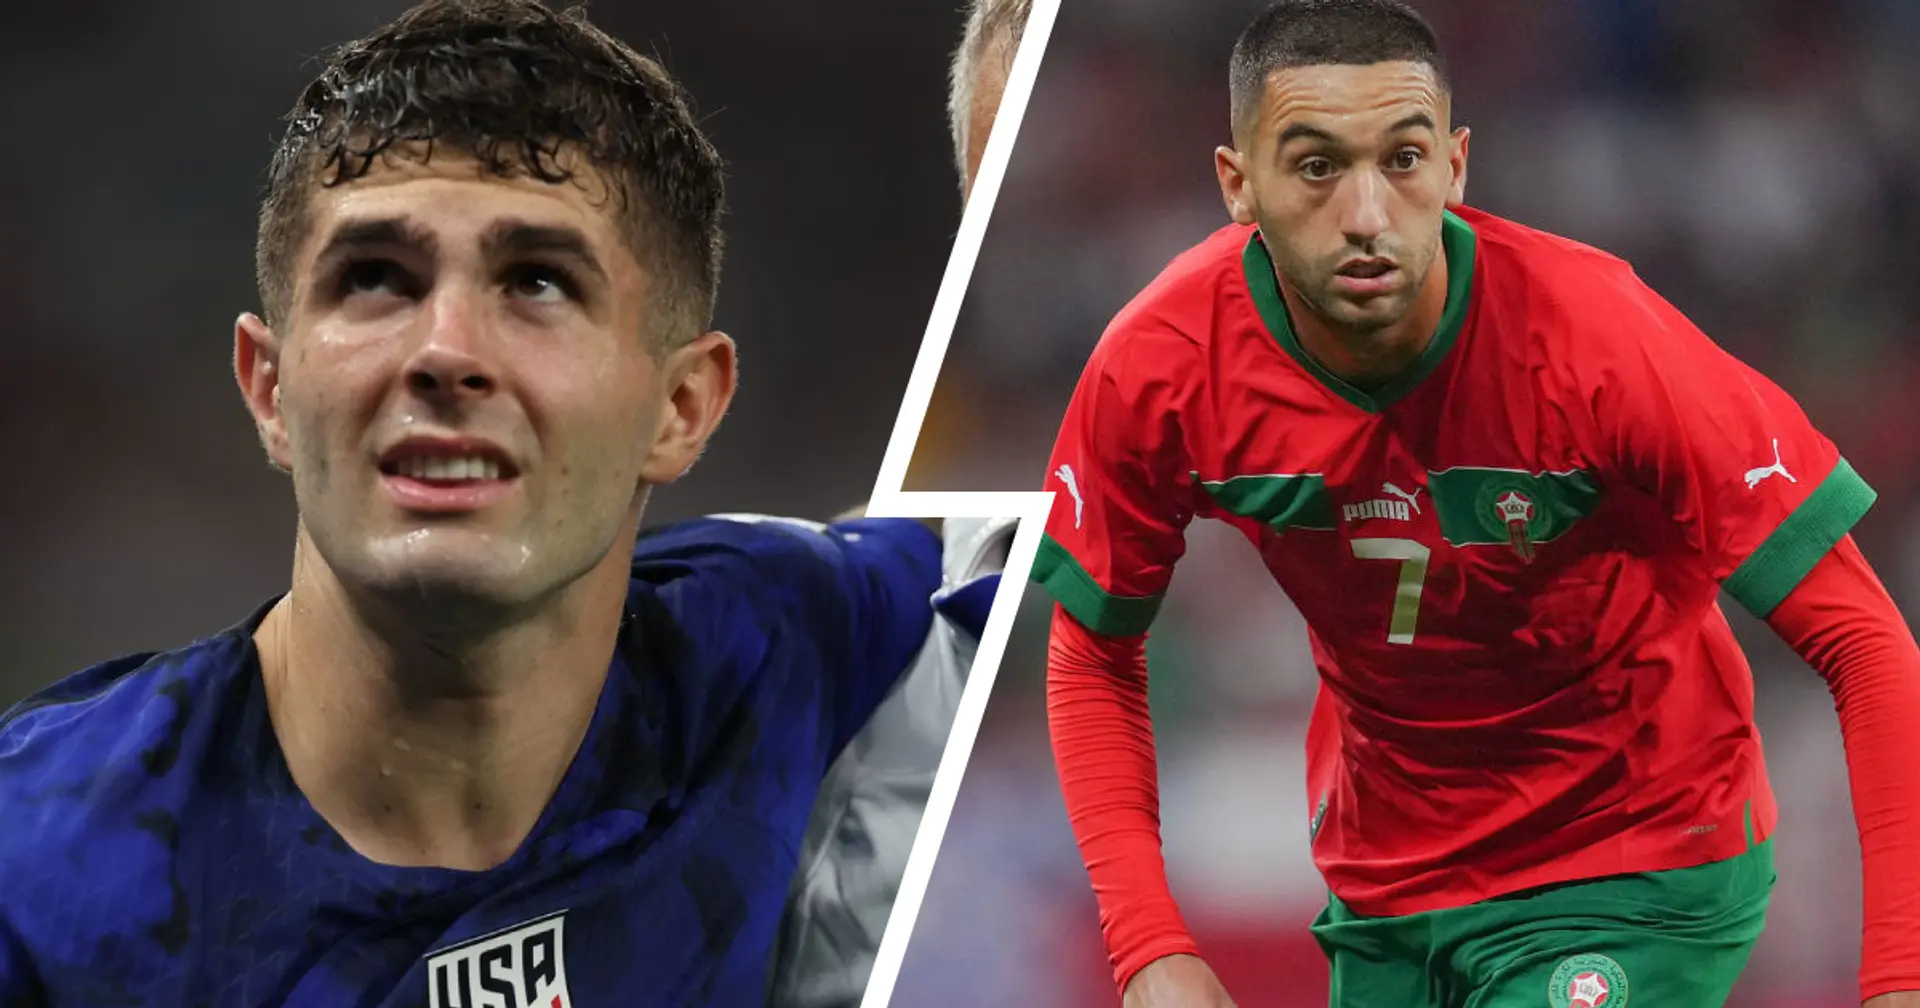 6 Chelsea players who have progressed to World Cup knockout – 4 more hoping to join them today